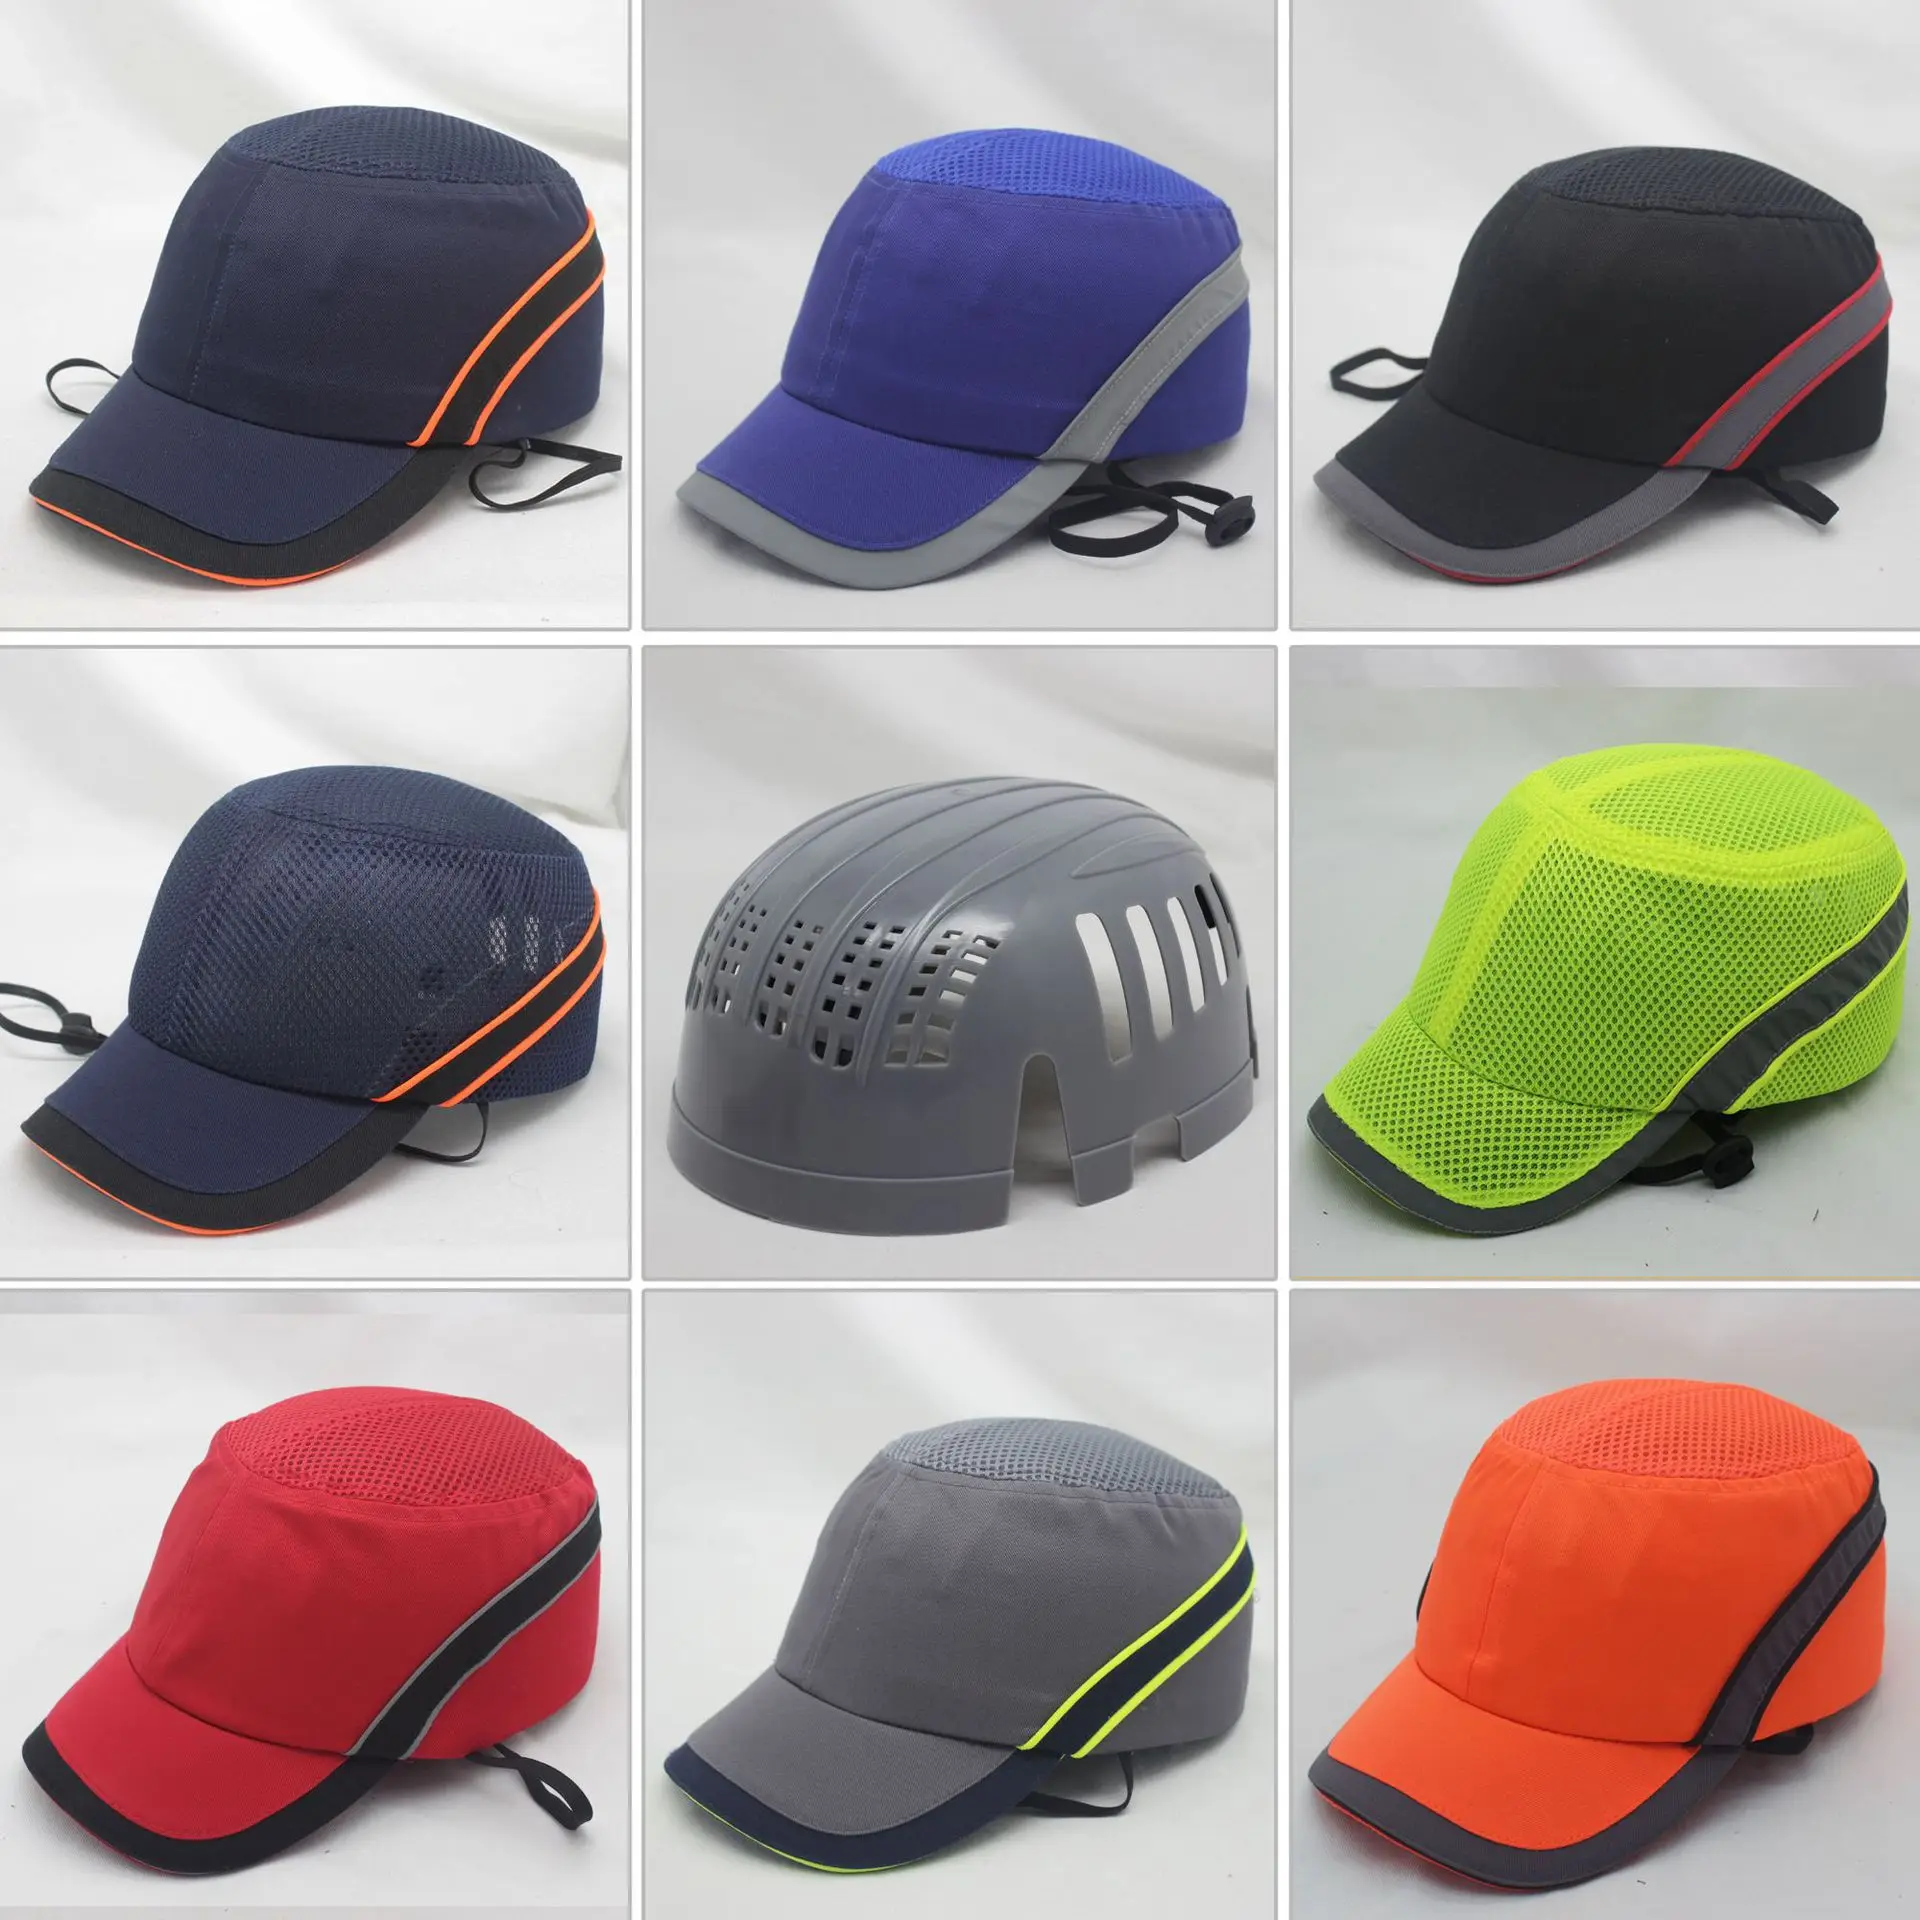 New Work Safety Bump Cap Hard Inner Shell Protective Helmet Baseball Hat Style For Work Factory Shop Carrying Head Protection